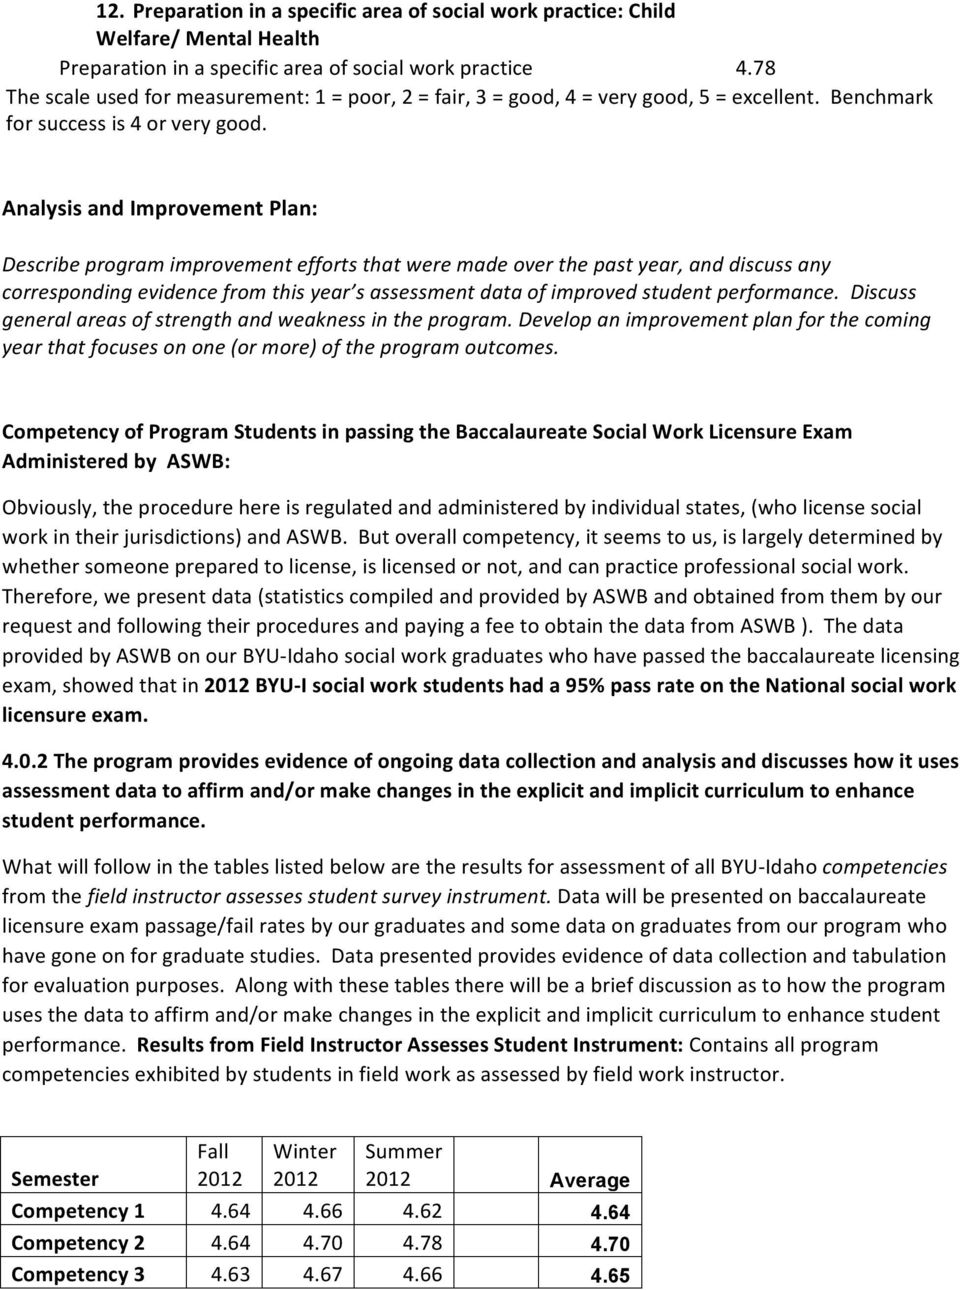 Analysis and Improvement Plan: Describe program improvement efforts that were made over the past year, and discuss any corresponding evidence from this year s assessment data of improved student